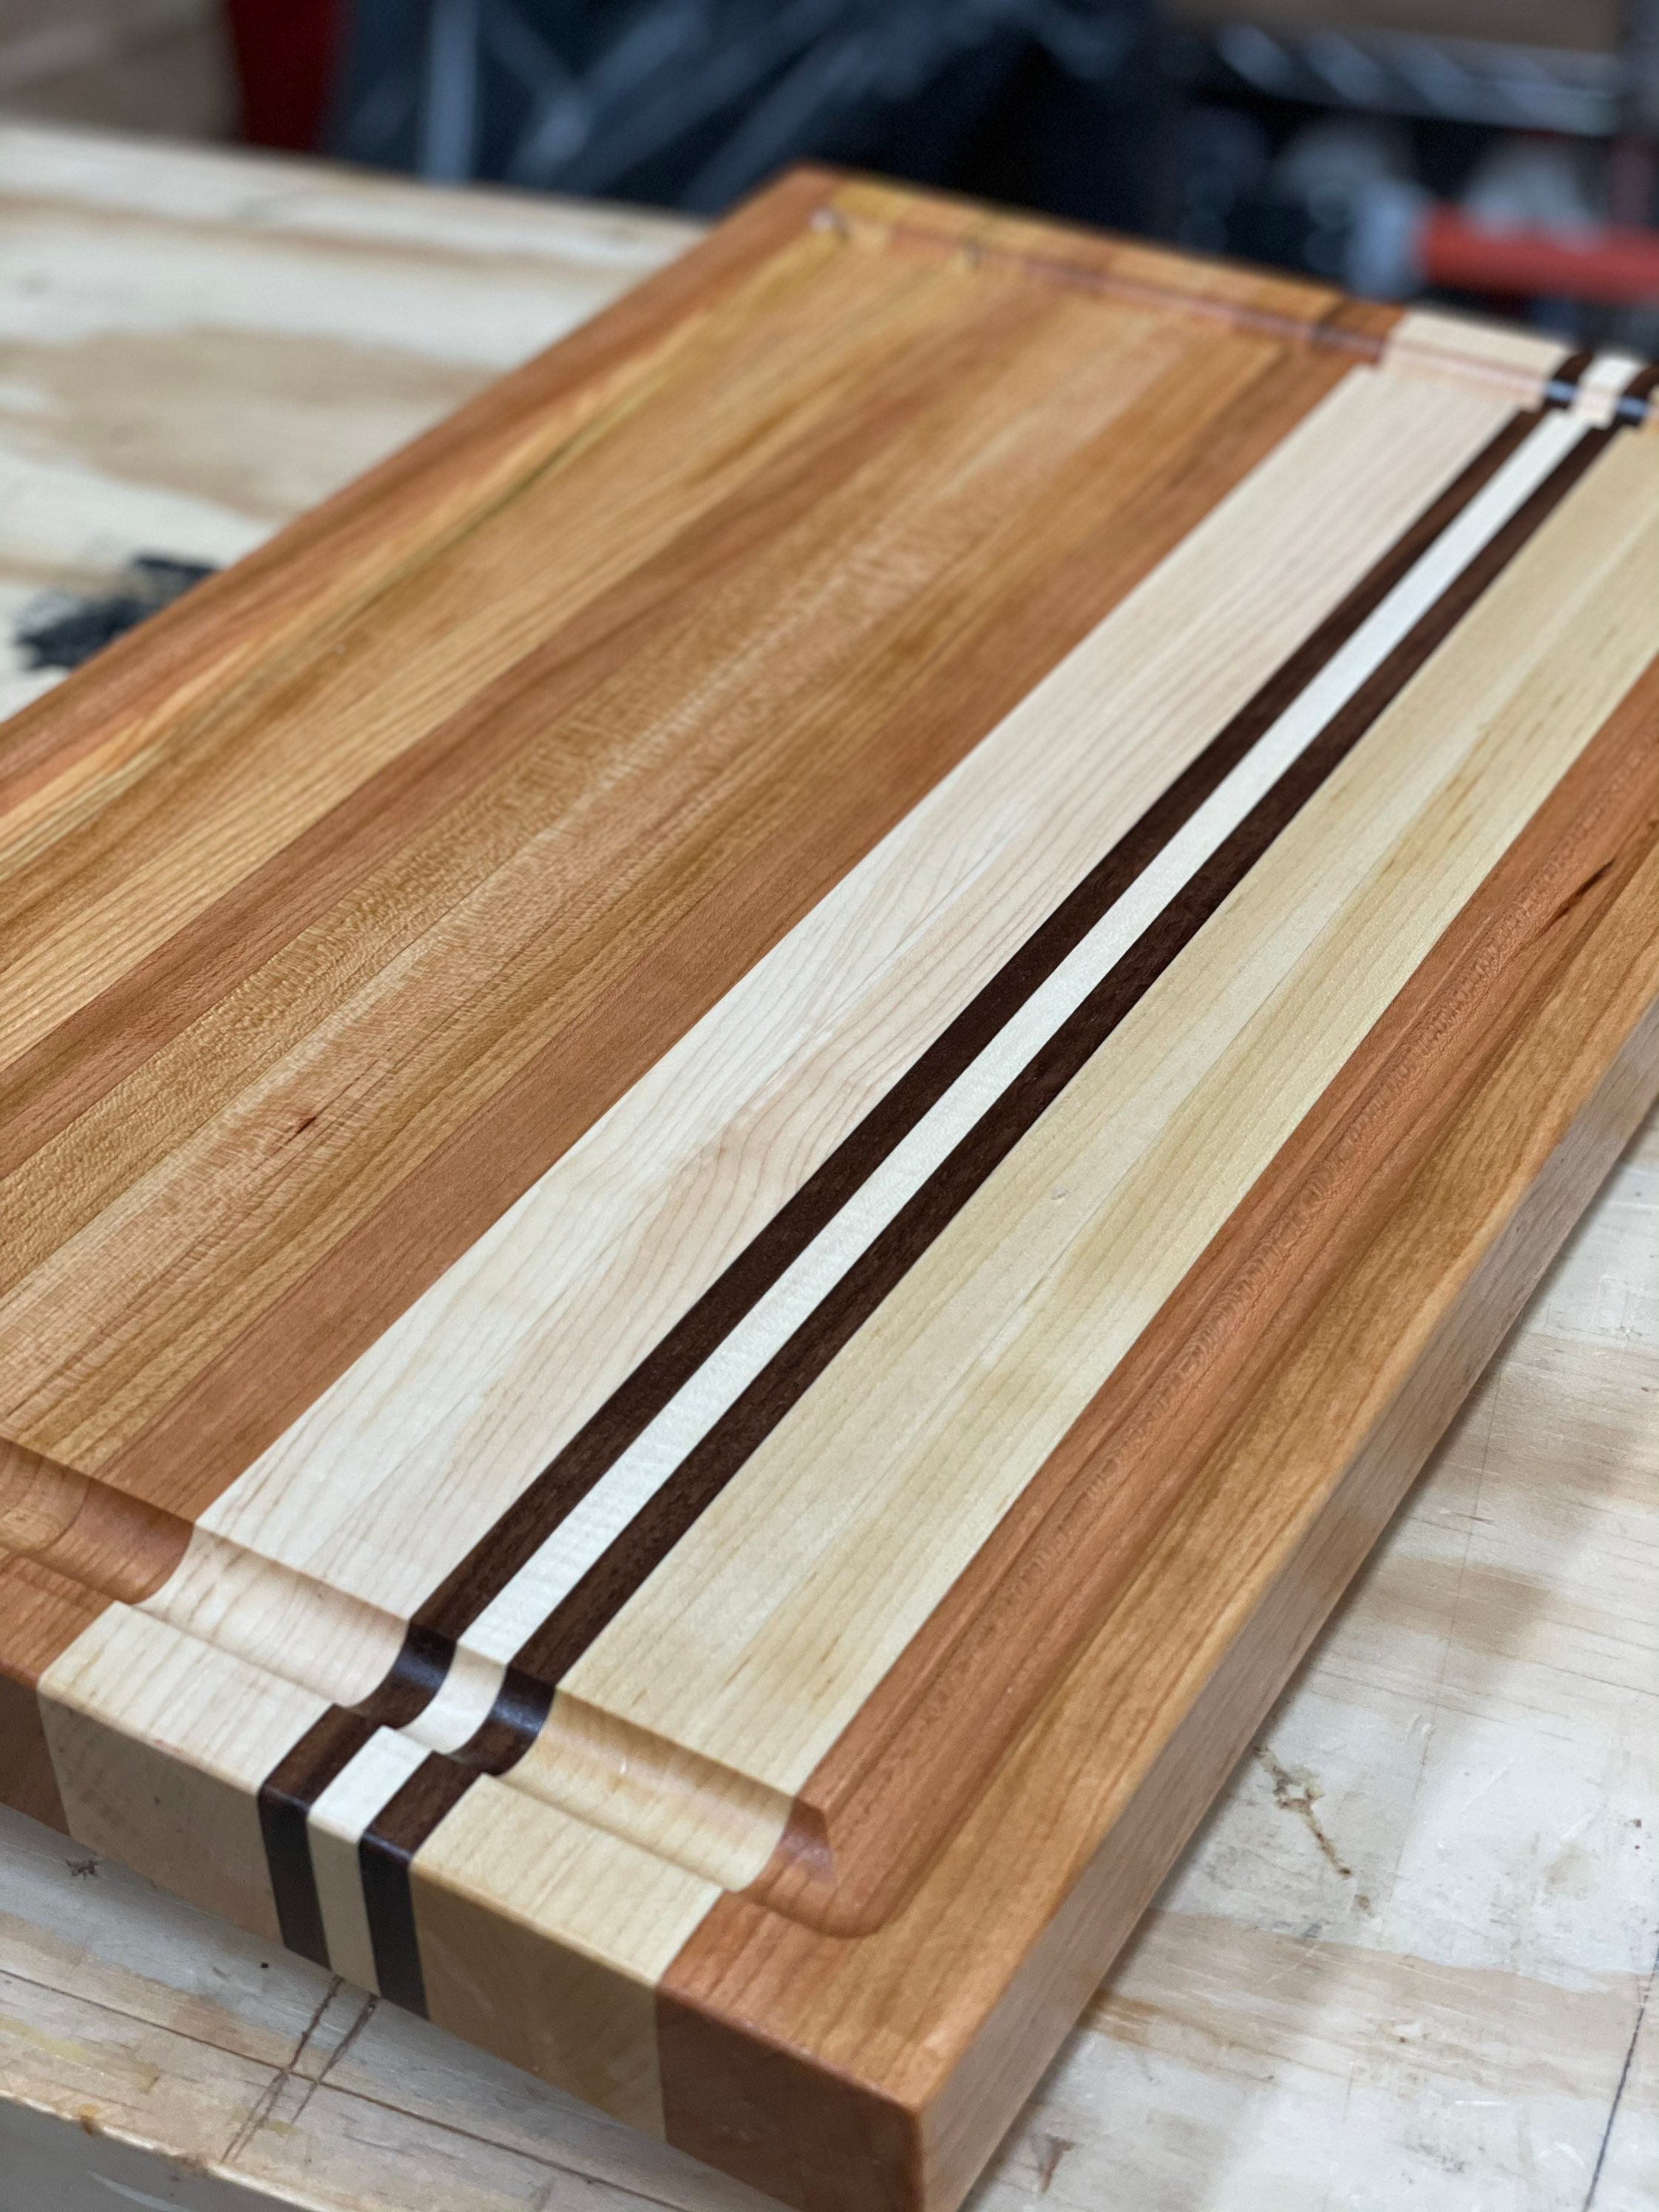 Cutting board craft: Update with leather trim- Chatelaine